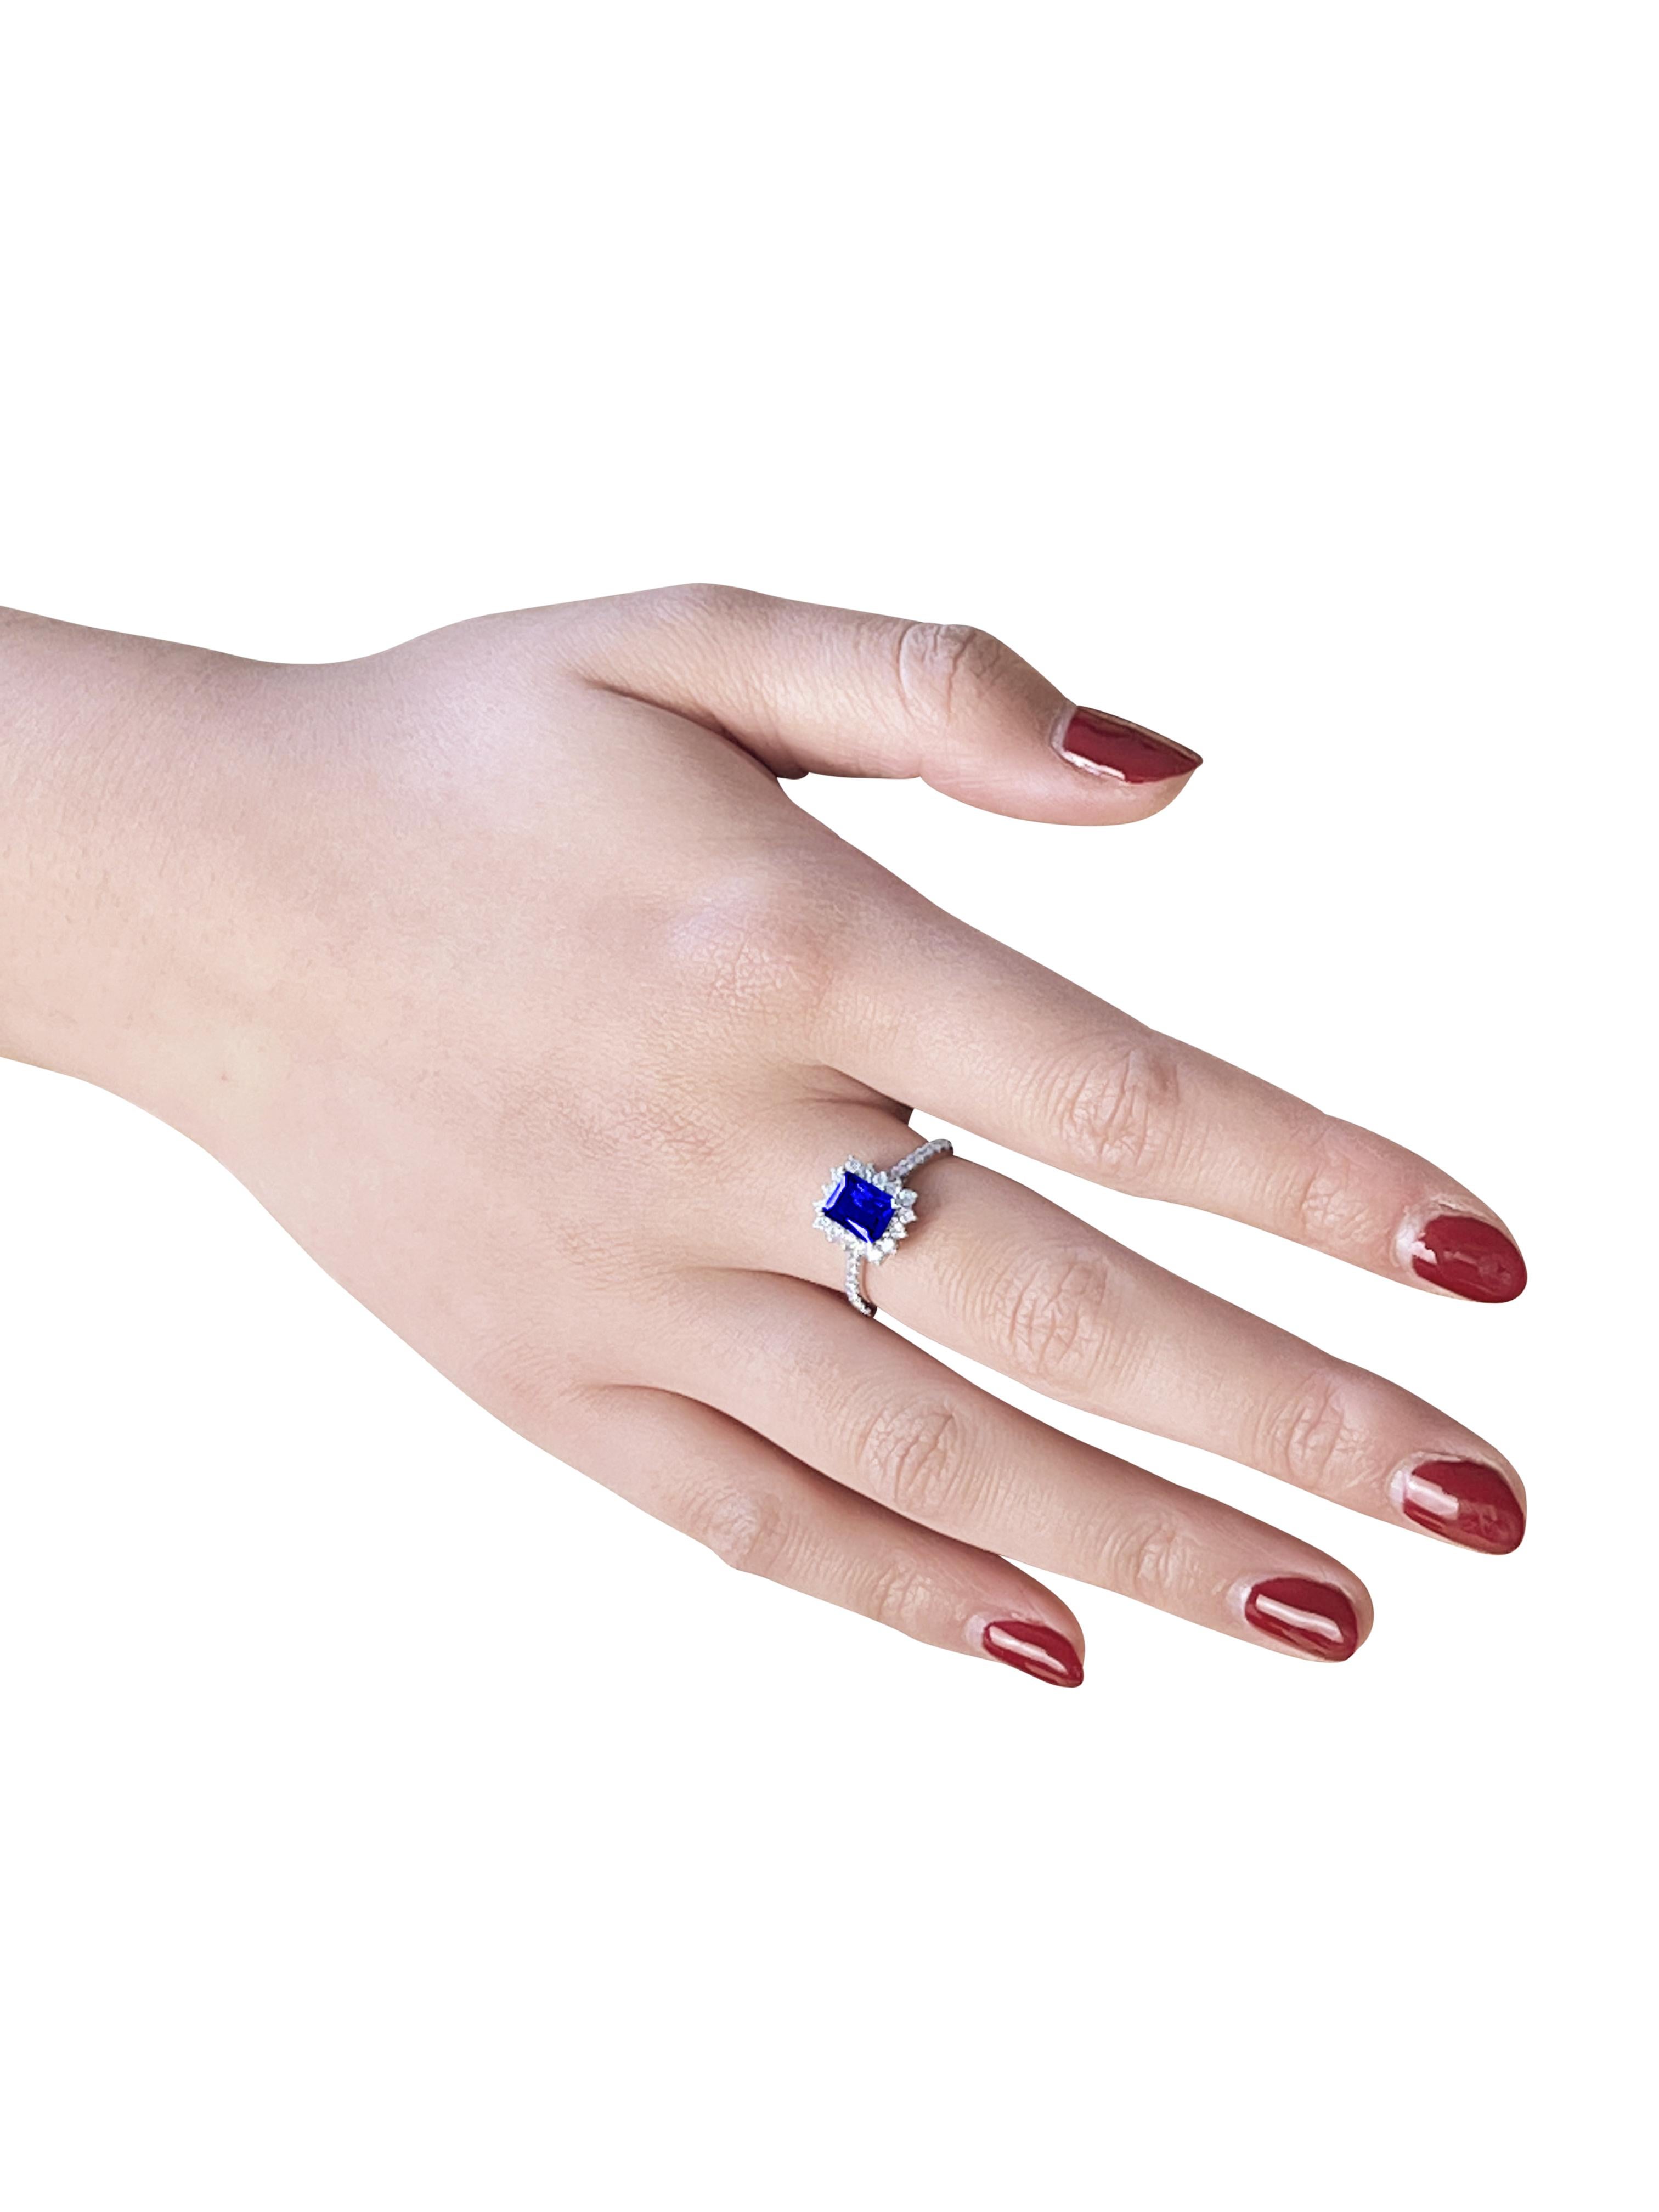 1.07 Carat Royal Blue Ceylon Natural Unheated Sapphire Ring  In New Condition For Sale In Weston, MA